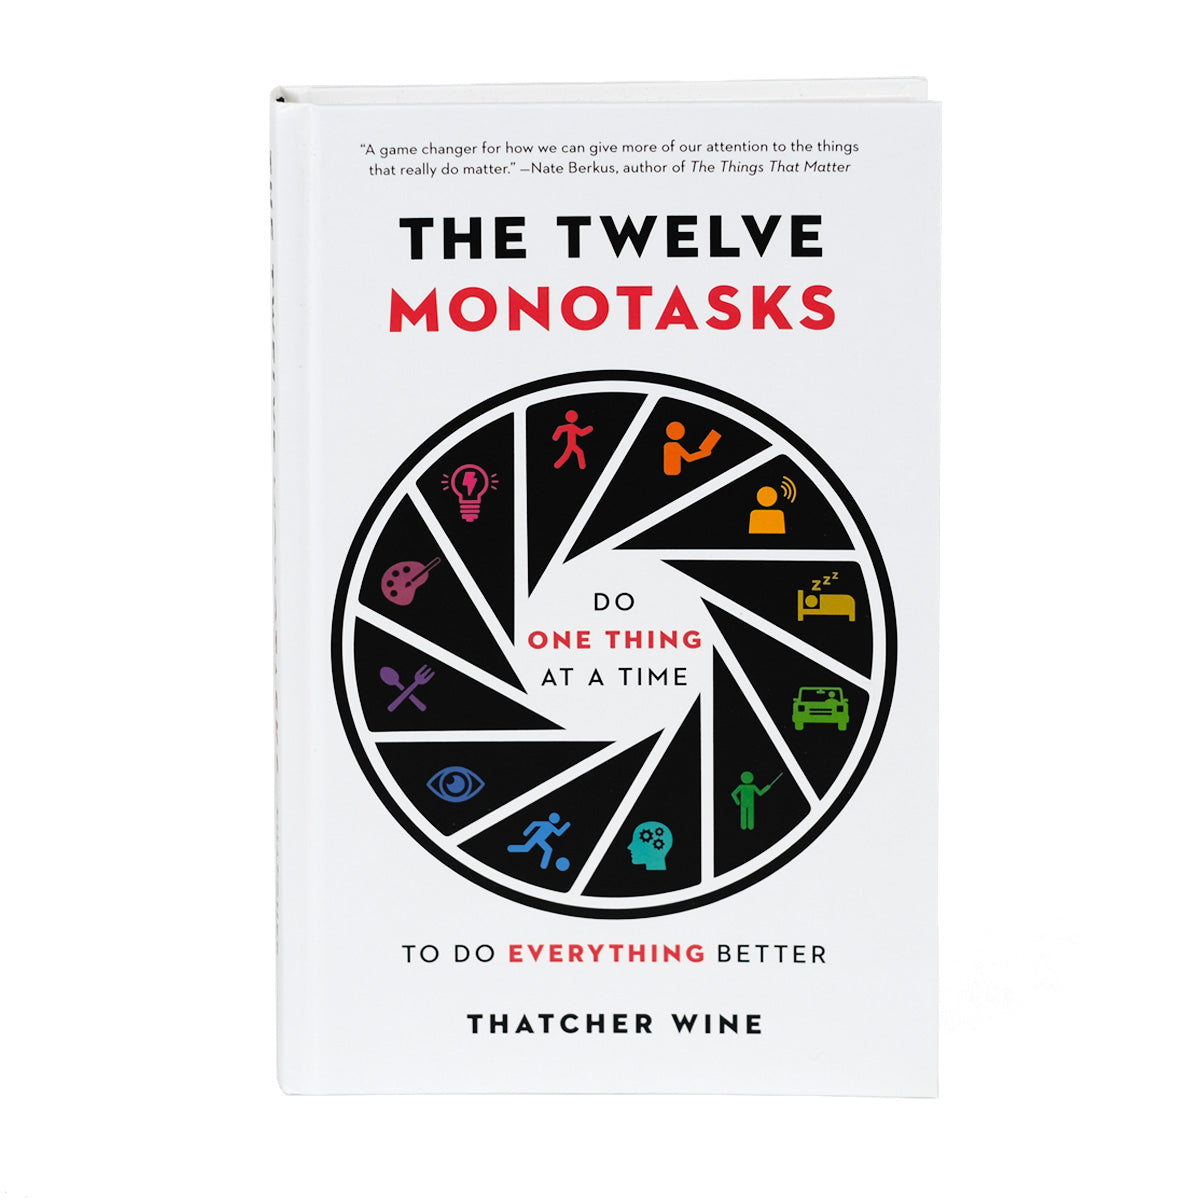 Teams and groups are reading The Twelve Monotasks to increase productivity, build focus, and decrease stress by doing one thing at a time. This page is for purchasing multiples of 10 books at one time. All books will be signed by Thatcher Wine.